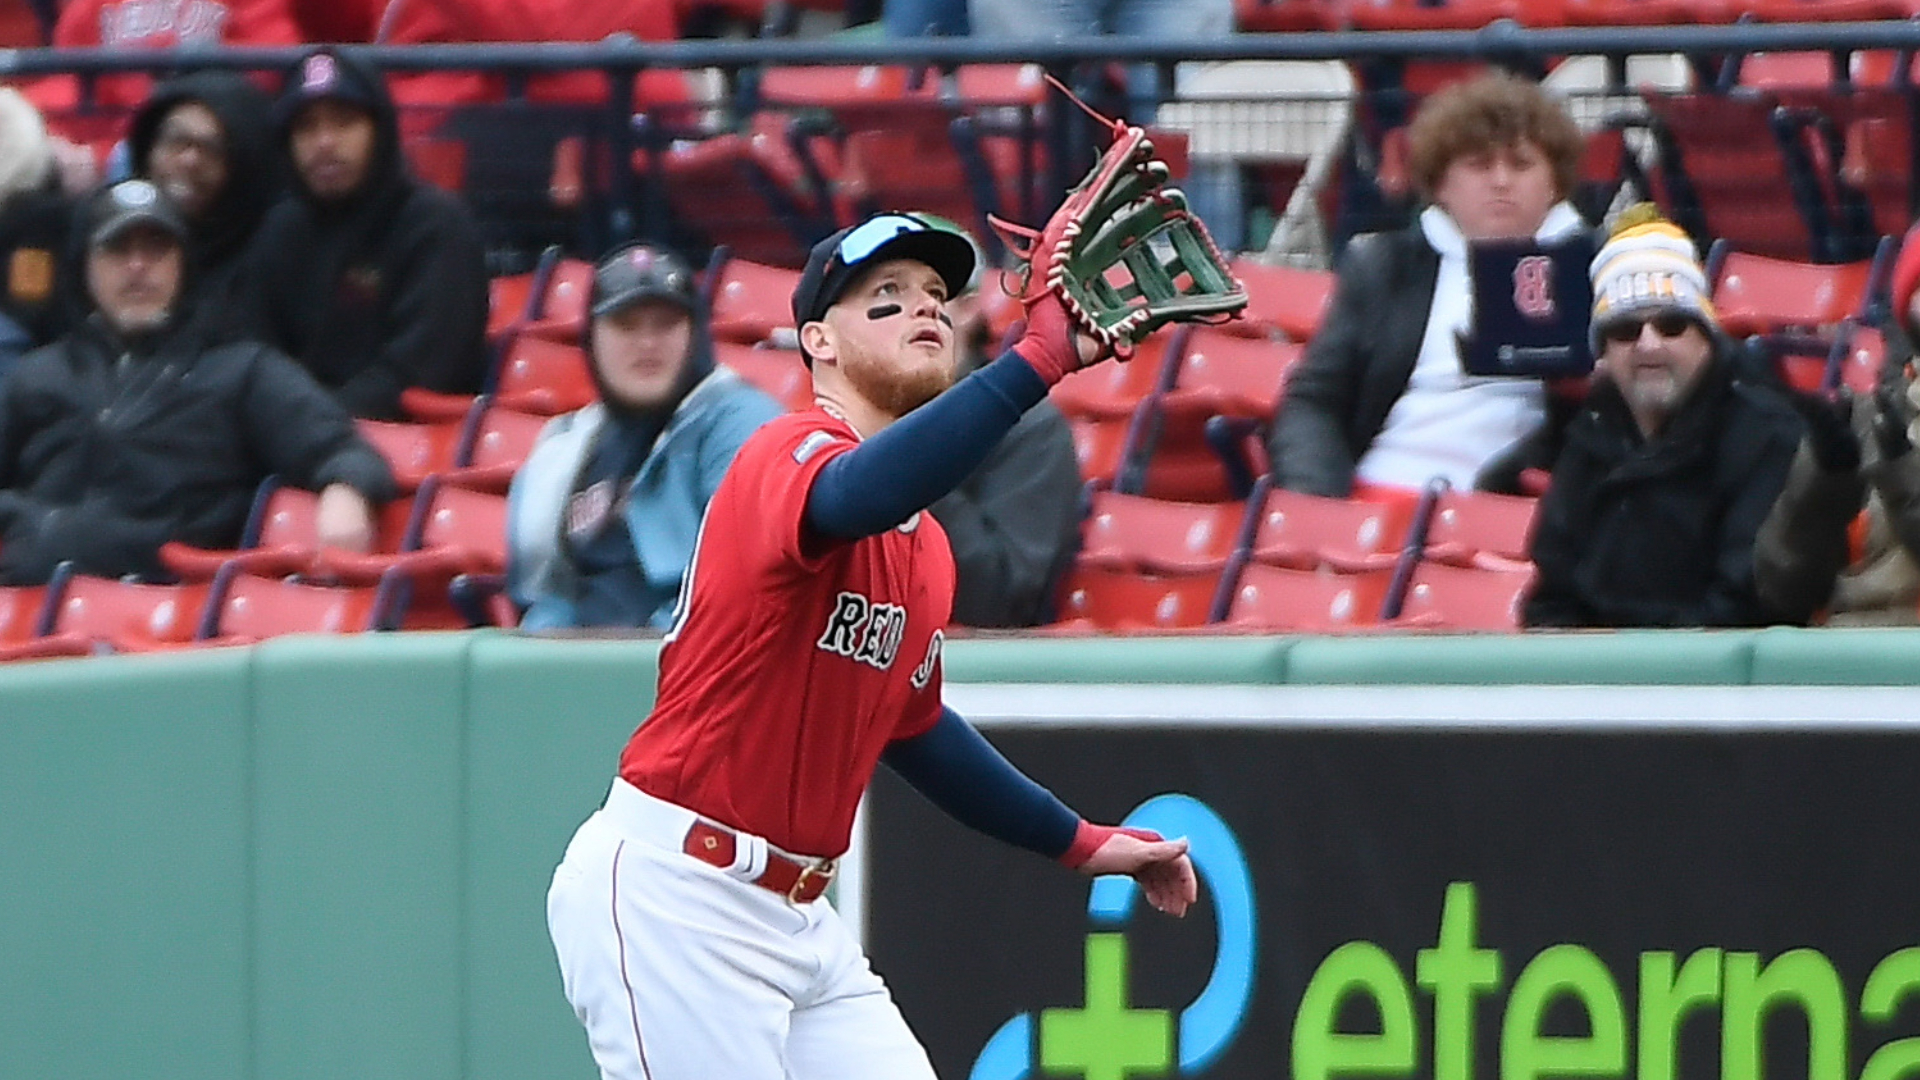 Alex Verdugo ejected from Red Sox game for unknown reason 